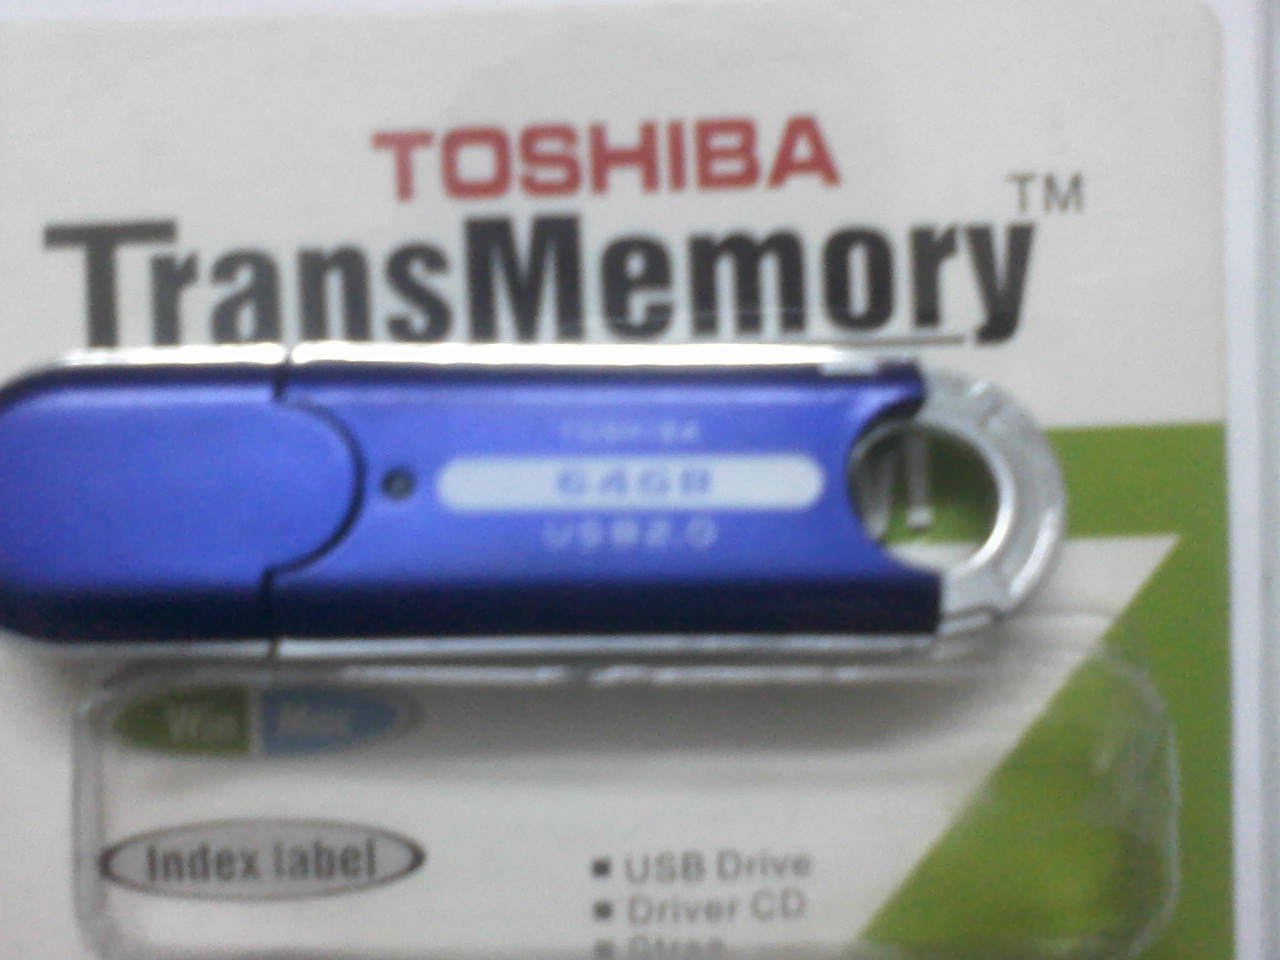 64GB TOSHIBA PENDRIVE MADE IN JAPAN large image 1